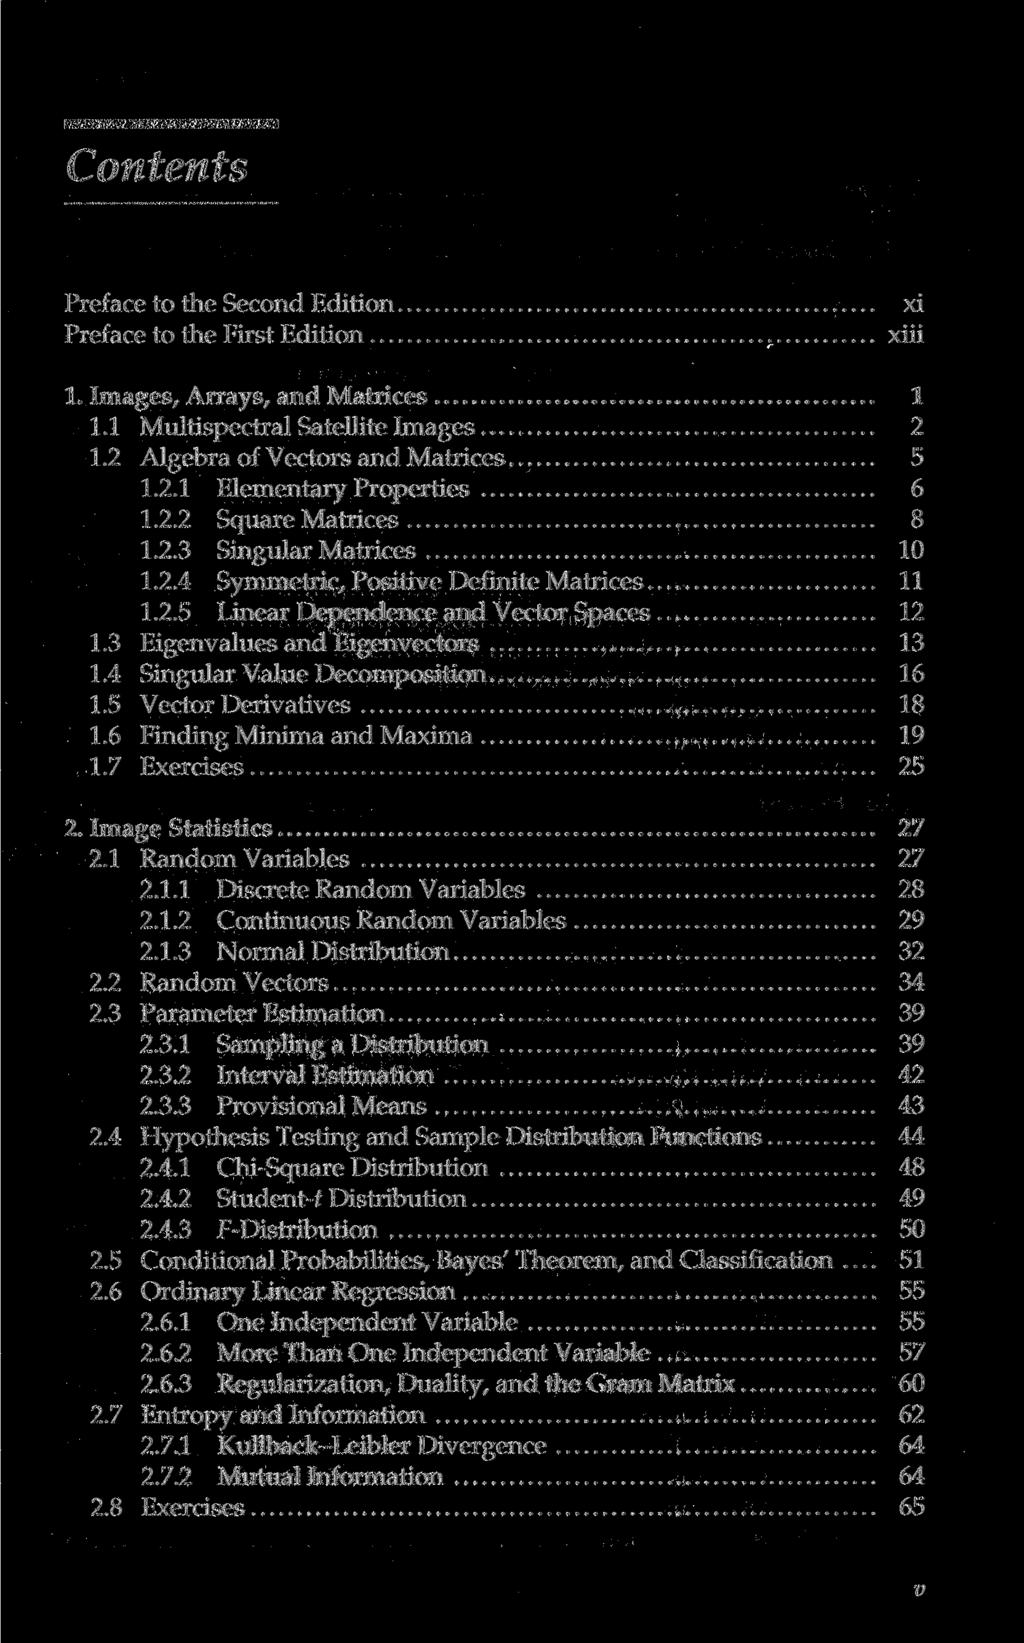 Contents Preface to the Second Edition Preface to the First Edition xi xiii 1. Images, Arrays, and Matrices 1 1.1 Multispectral Satellite Images 2 1.2 Algebra of Vectors and Matrices 5 1.2.1 Elementary Properties 6 1.